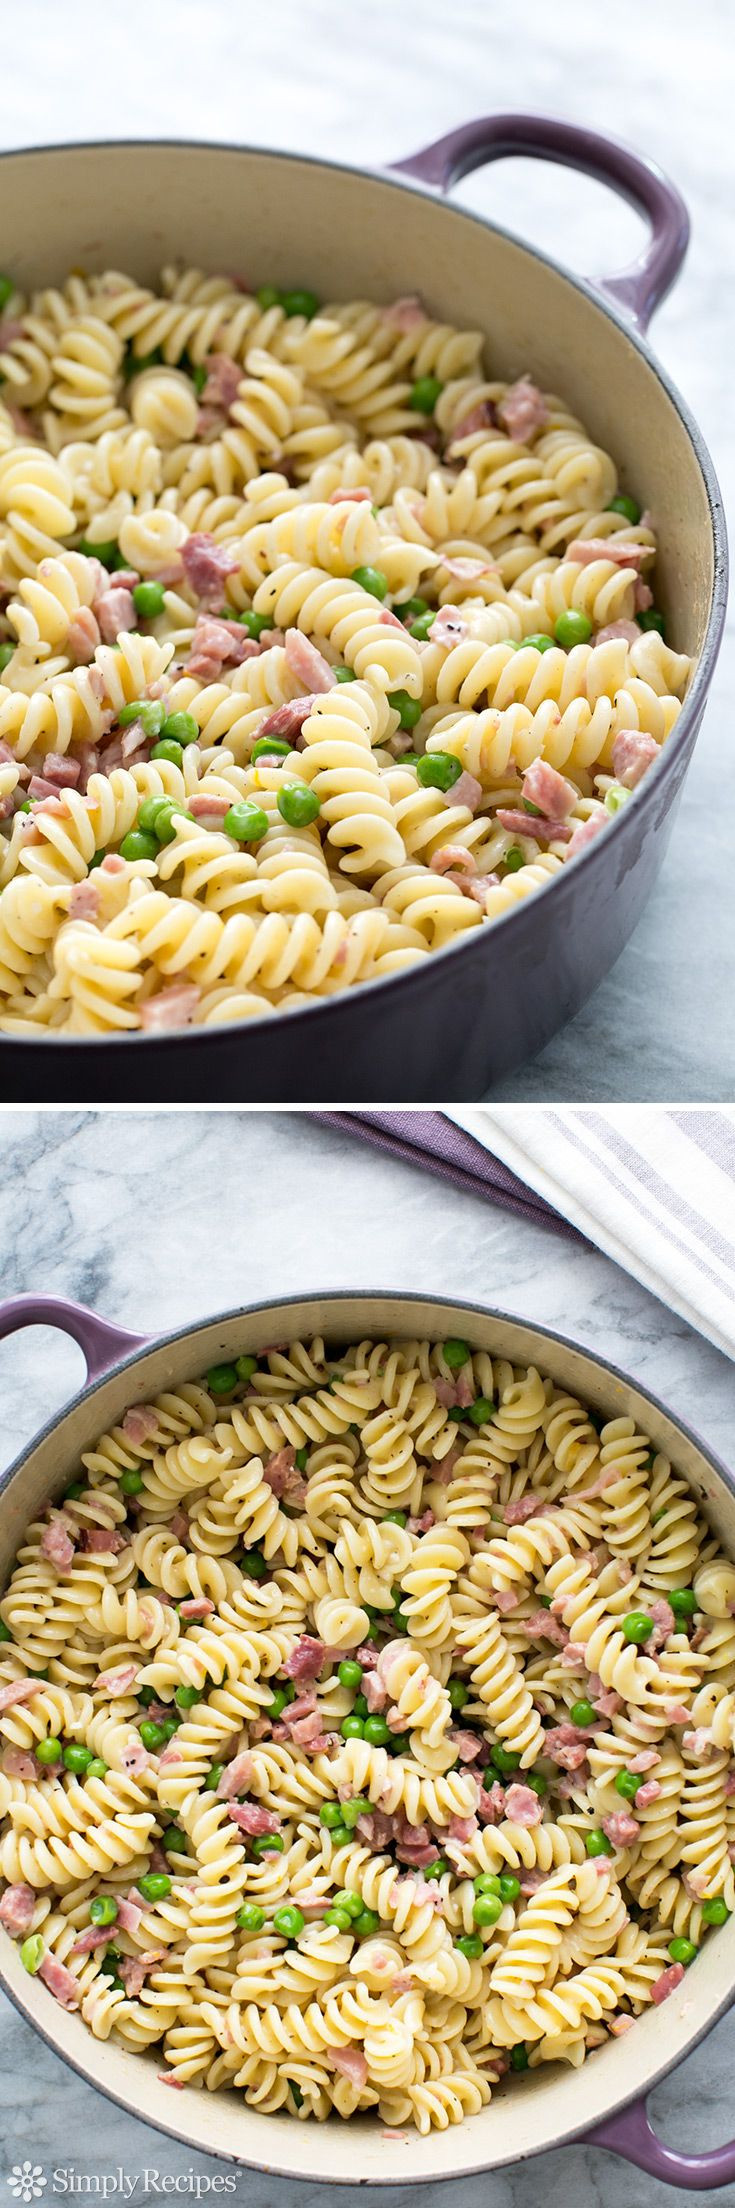 Healthy Leftover Ham Recipes
 Pasta with Ham and Peas Great use for leftover ham